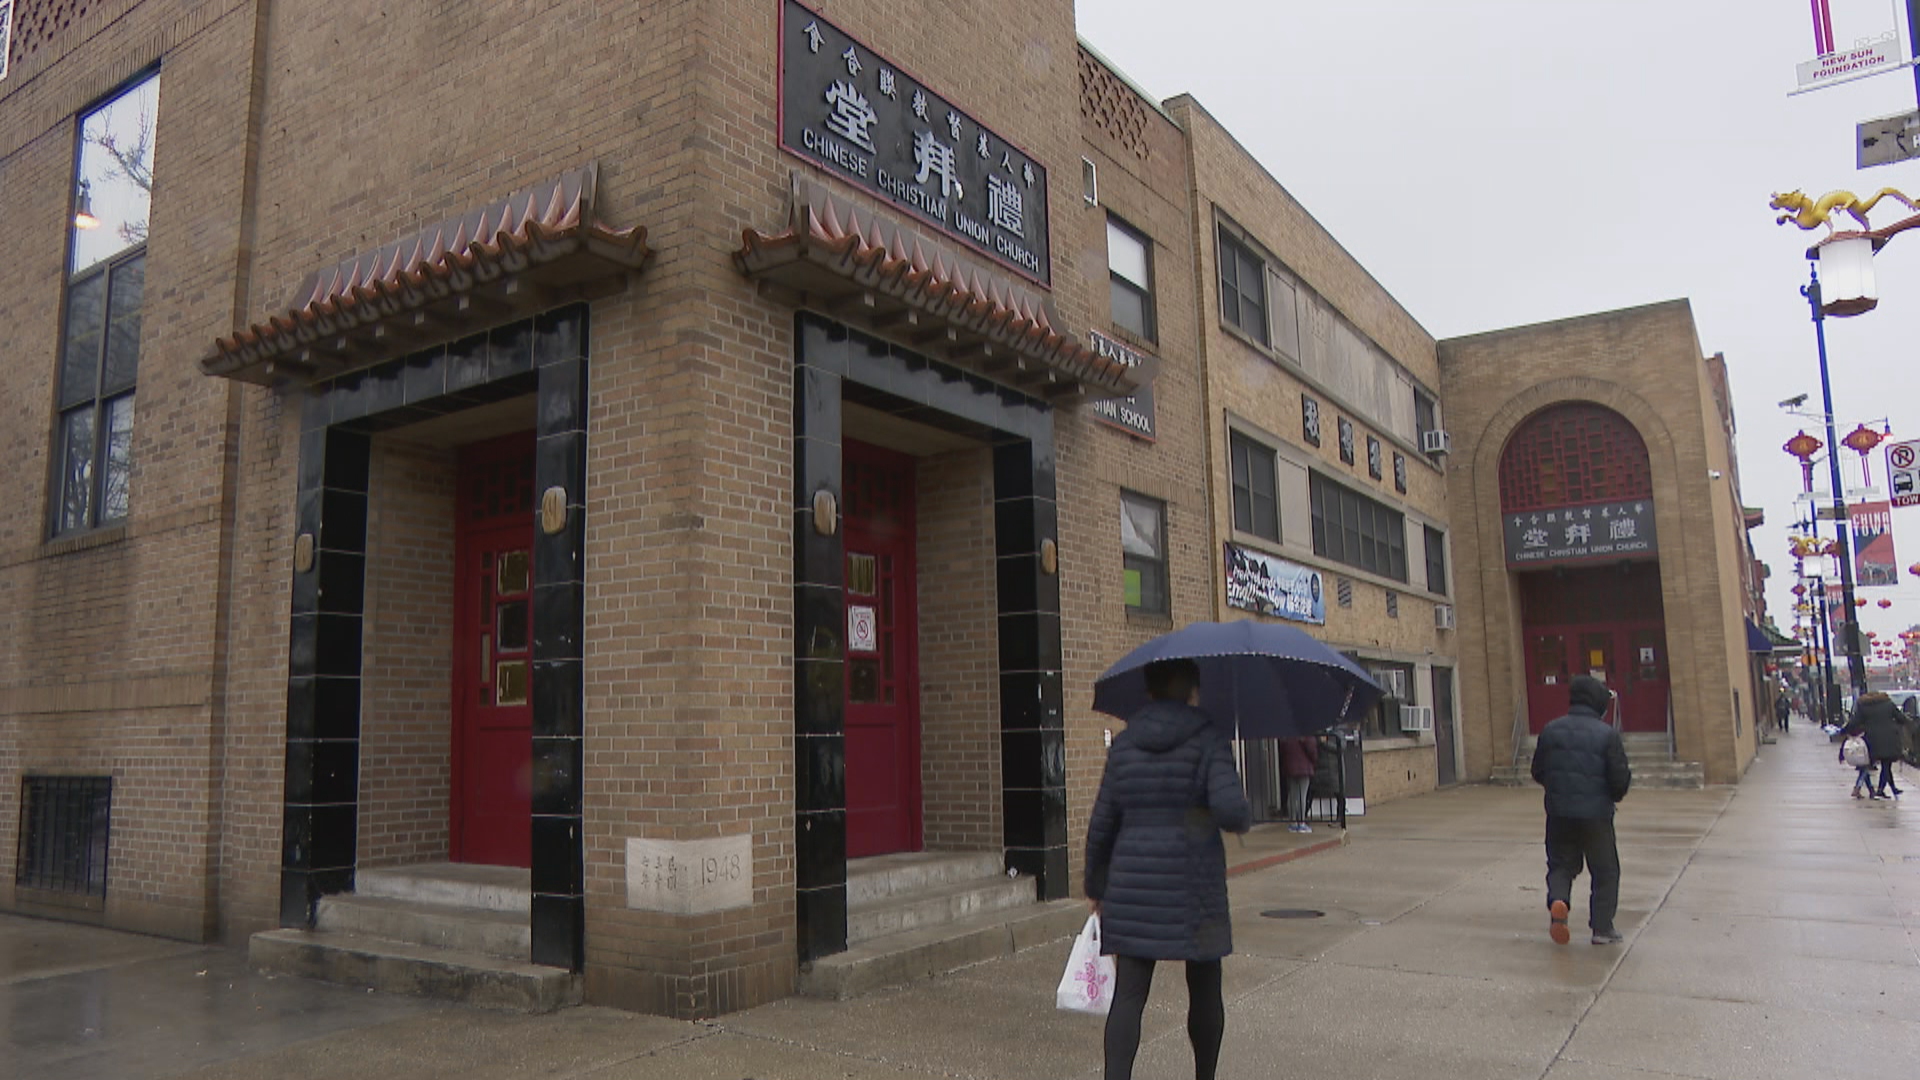 news.wttw.com: Chicago’s Growing Asian American Population Looks Toward More Representation